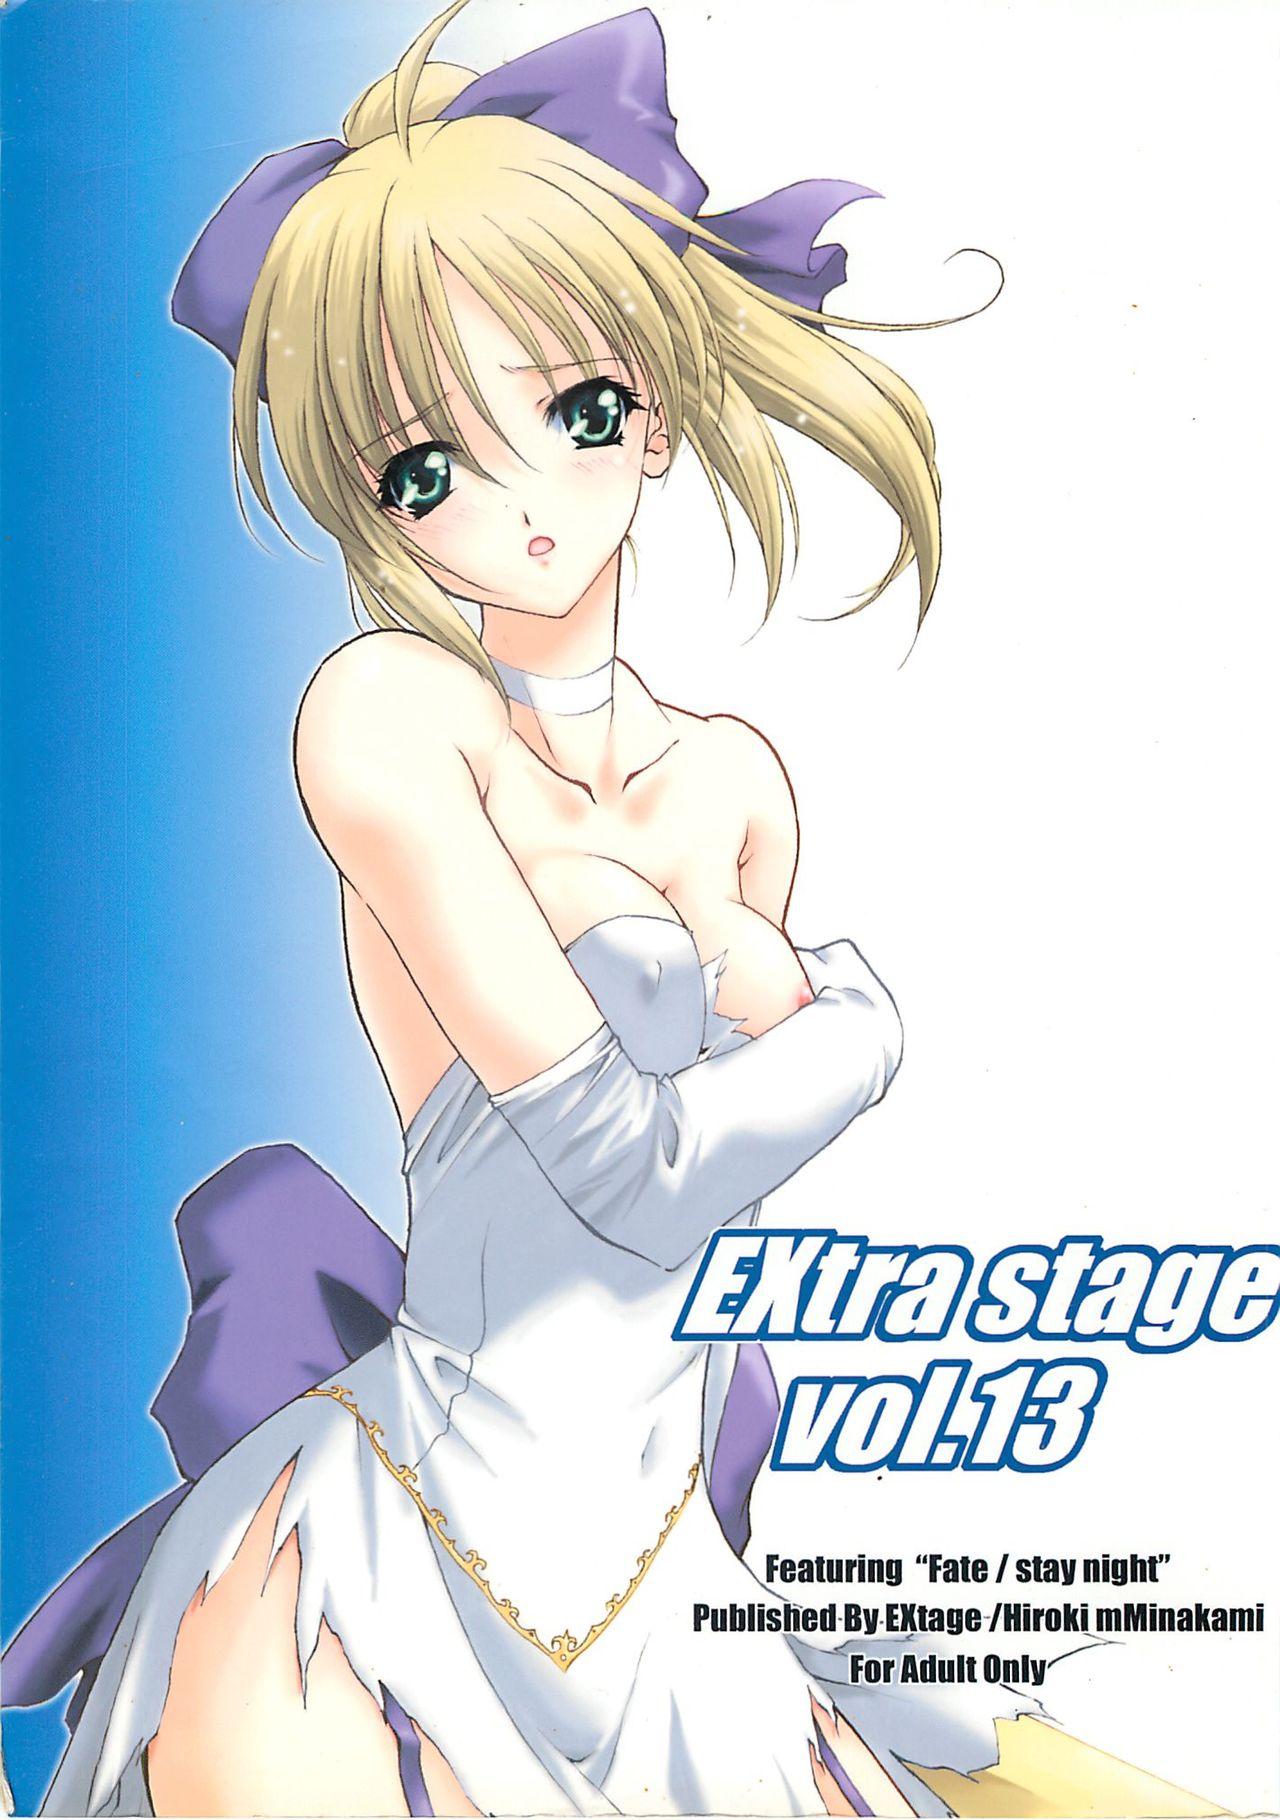 Work EXtra stage vol. 13 - Fate stay night Sharing - Picture 1